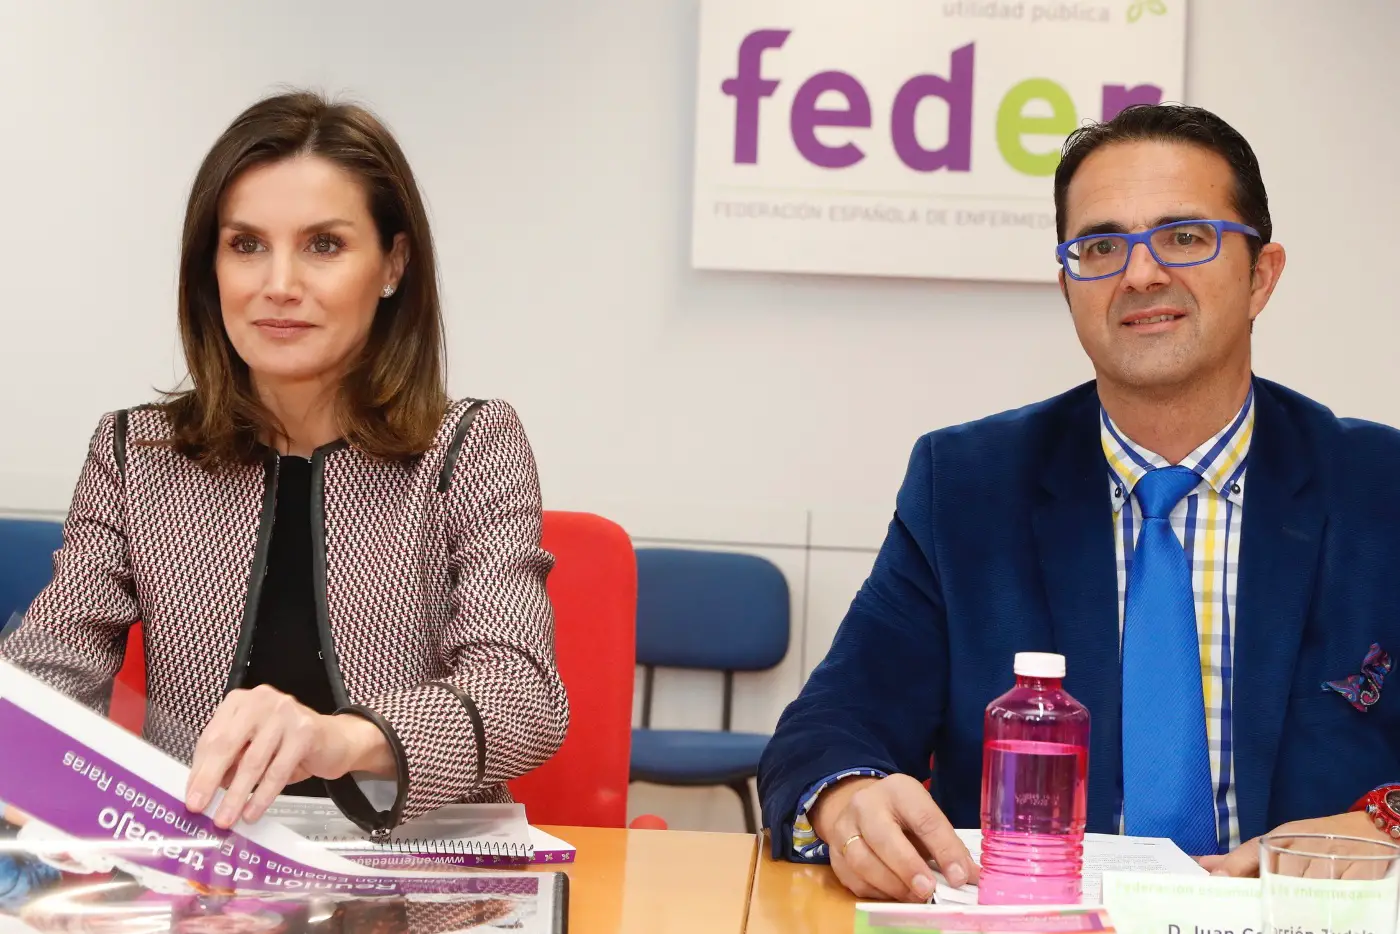 Queen Letizia of Spain Kept it Professional for FEDER Meeting